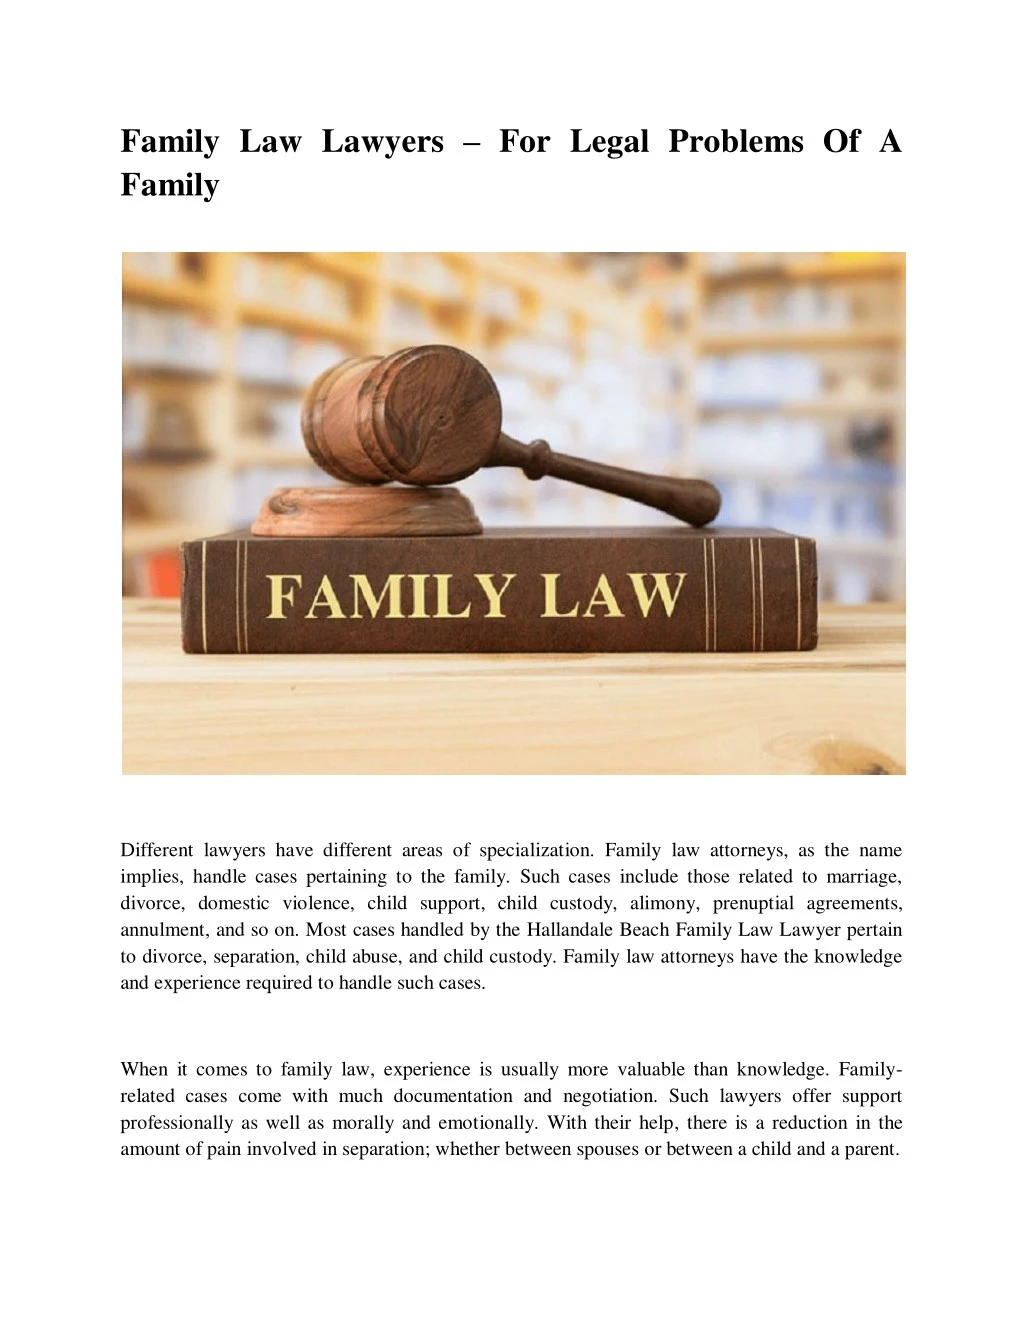 family law lawyers for legal problems of a family